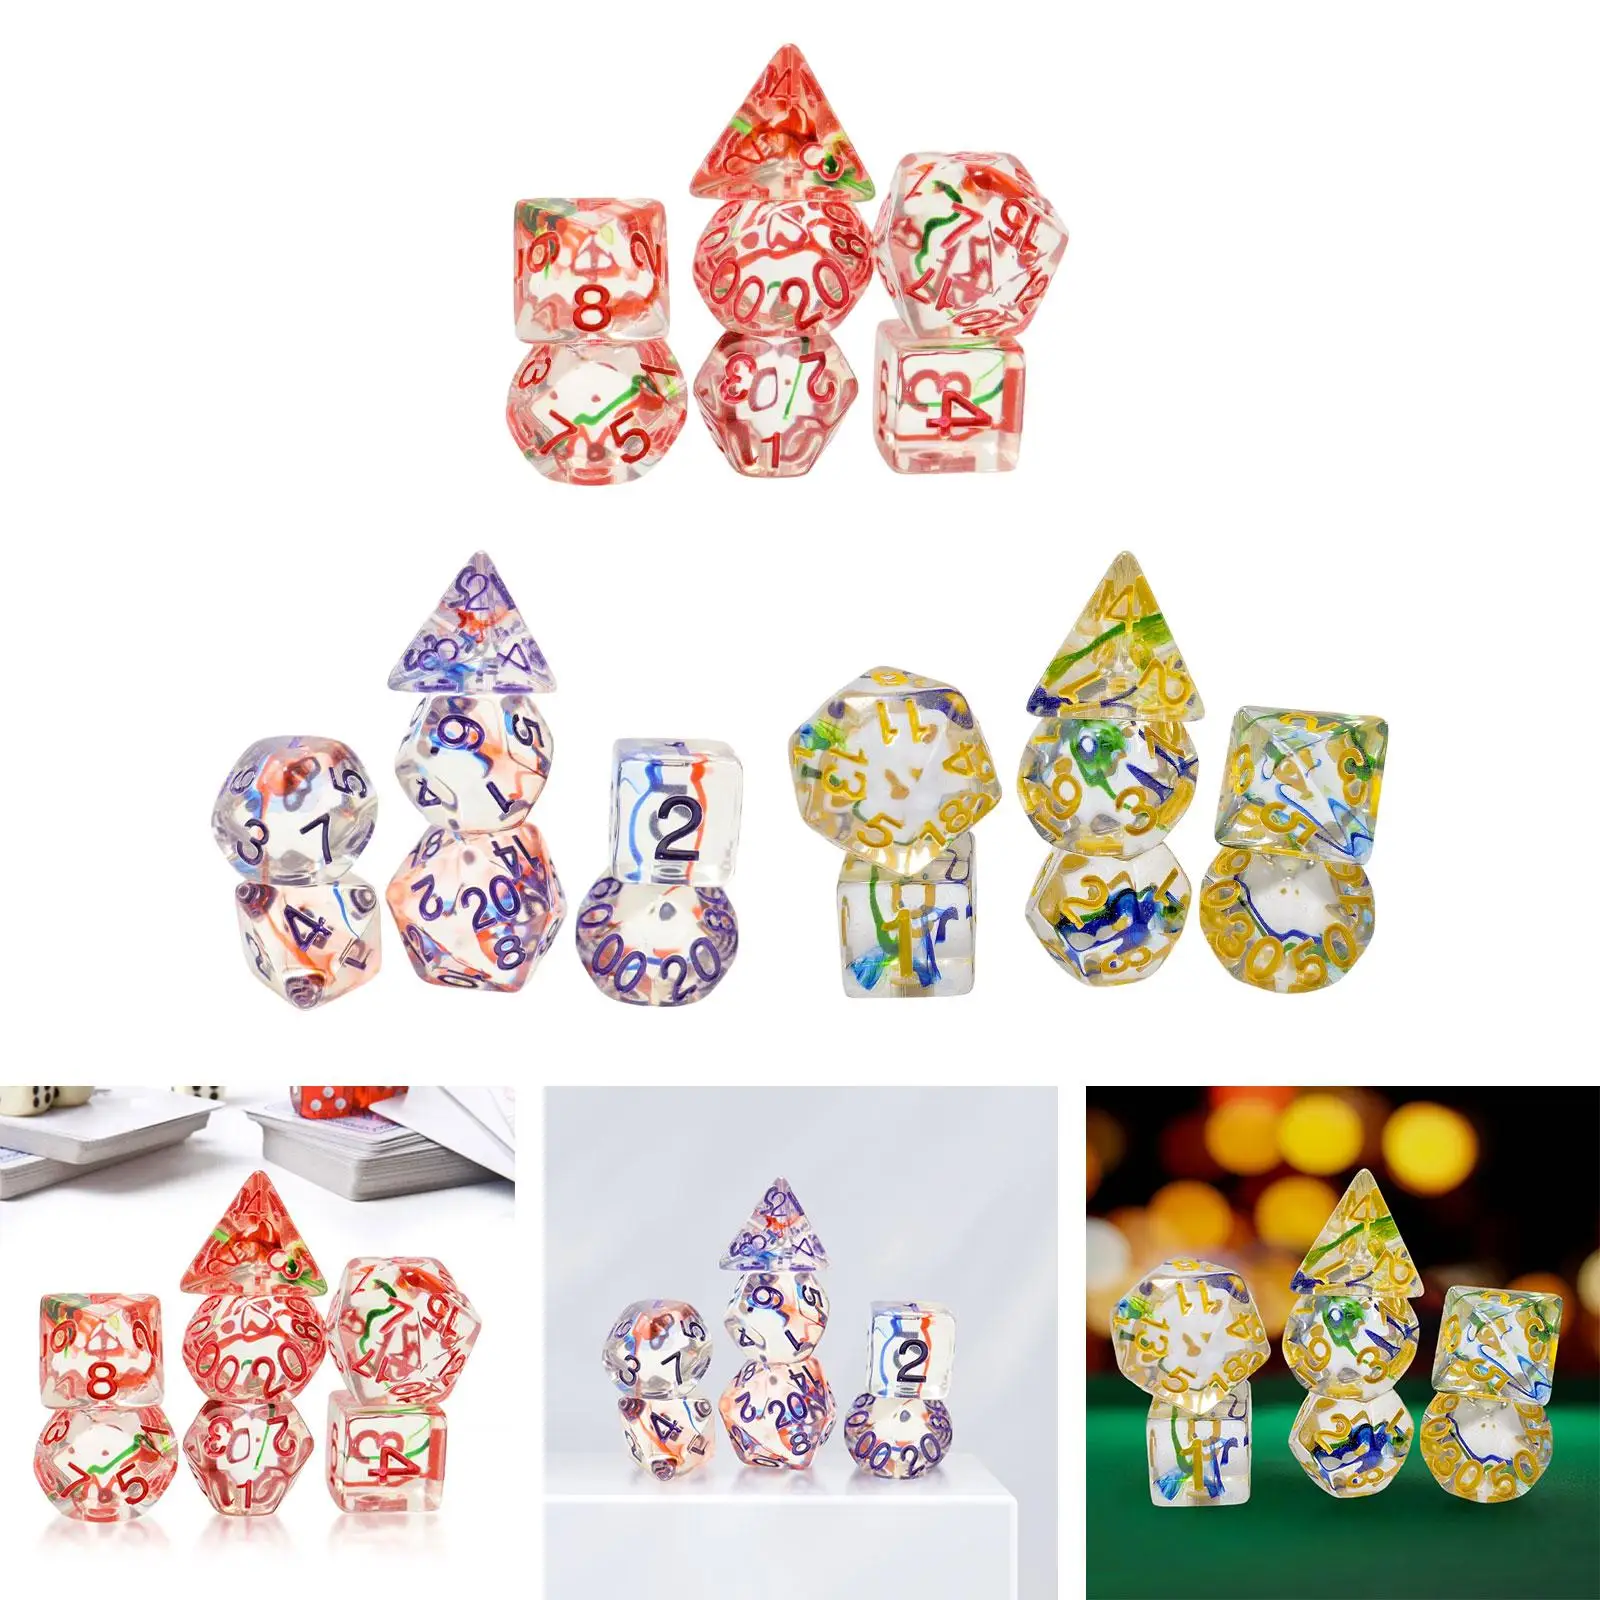 7 Pieces Dice Set Resin D20 D12 D10 D8 D6 D4 Party Supplies Multi Sided Game Dices for Party KTV Bar Card Games Card Game